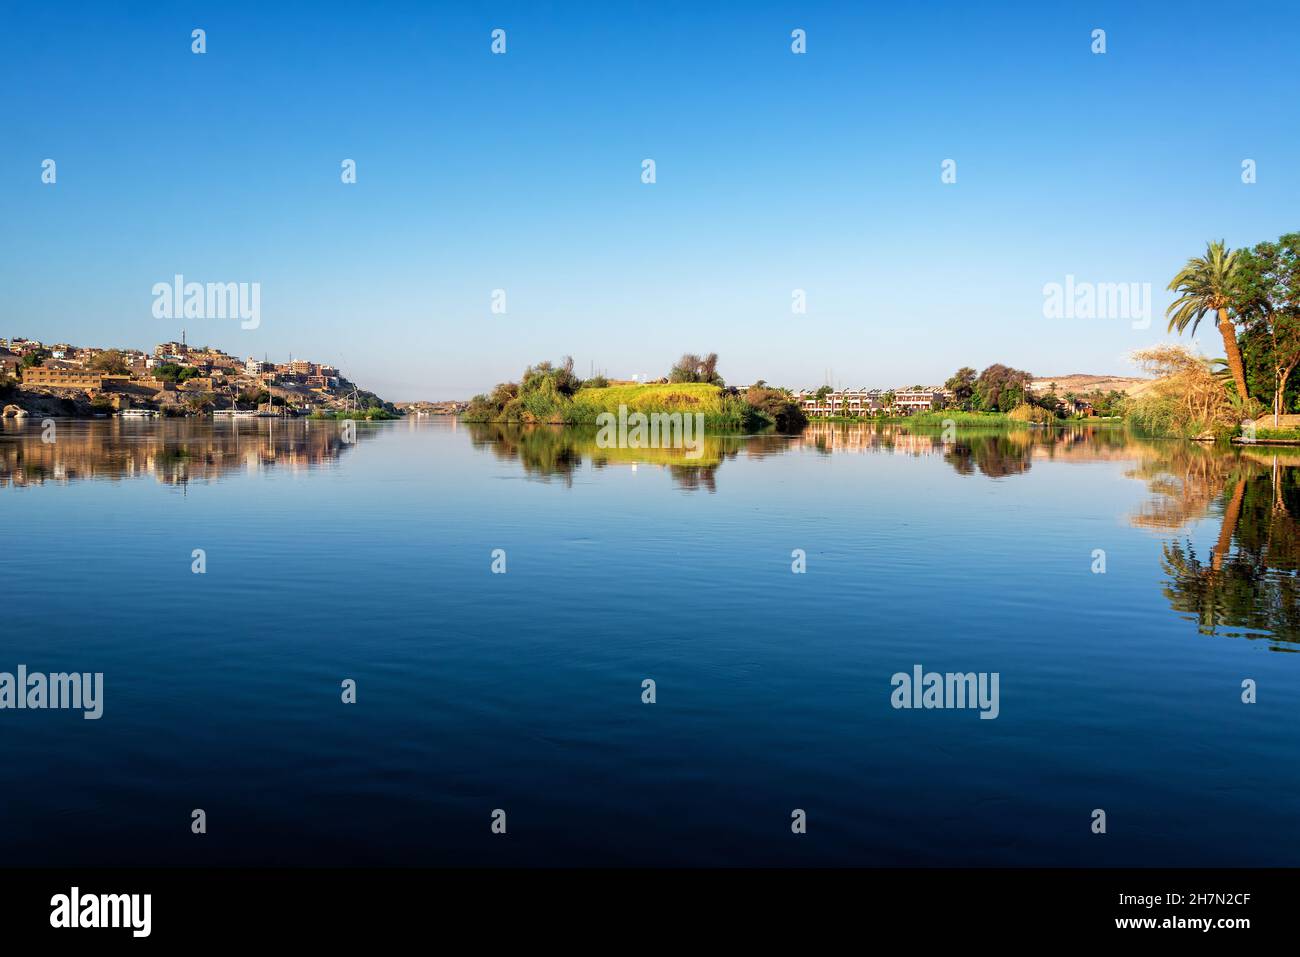 View of the Nile River in Aswan, Egypt Stock Photo